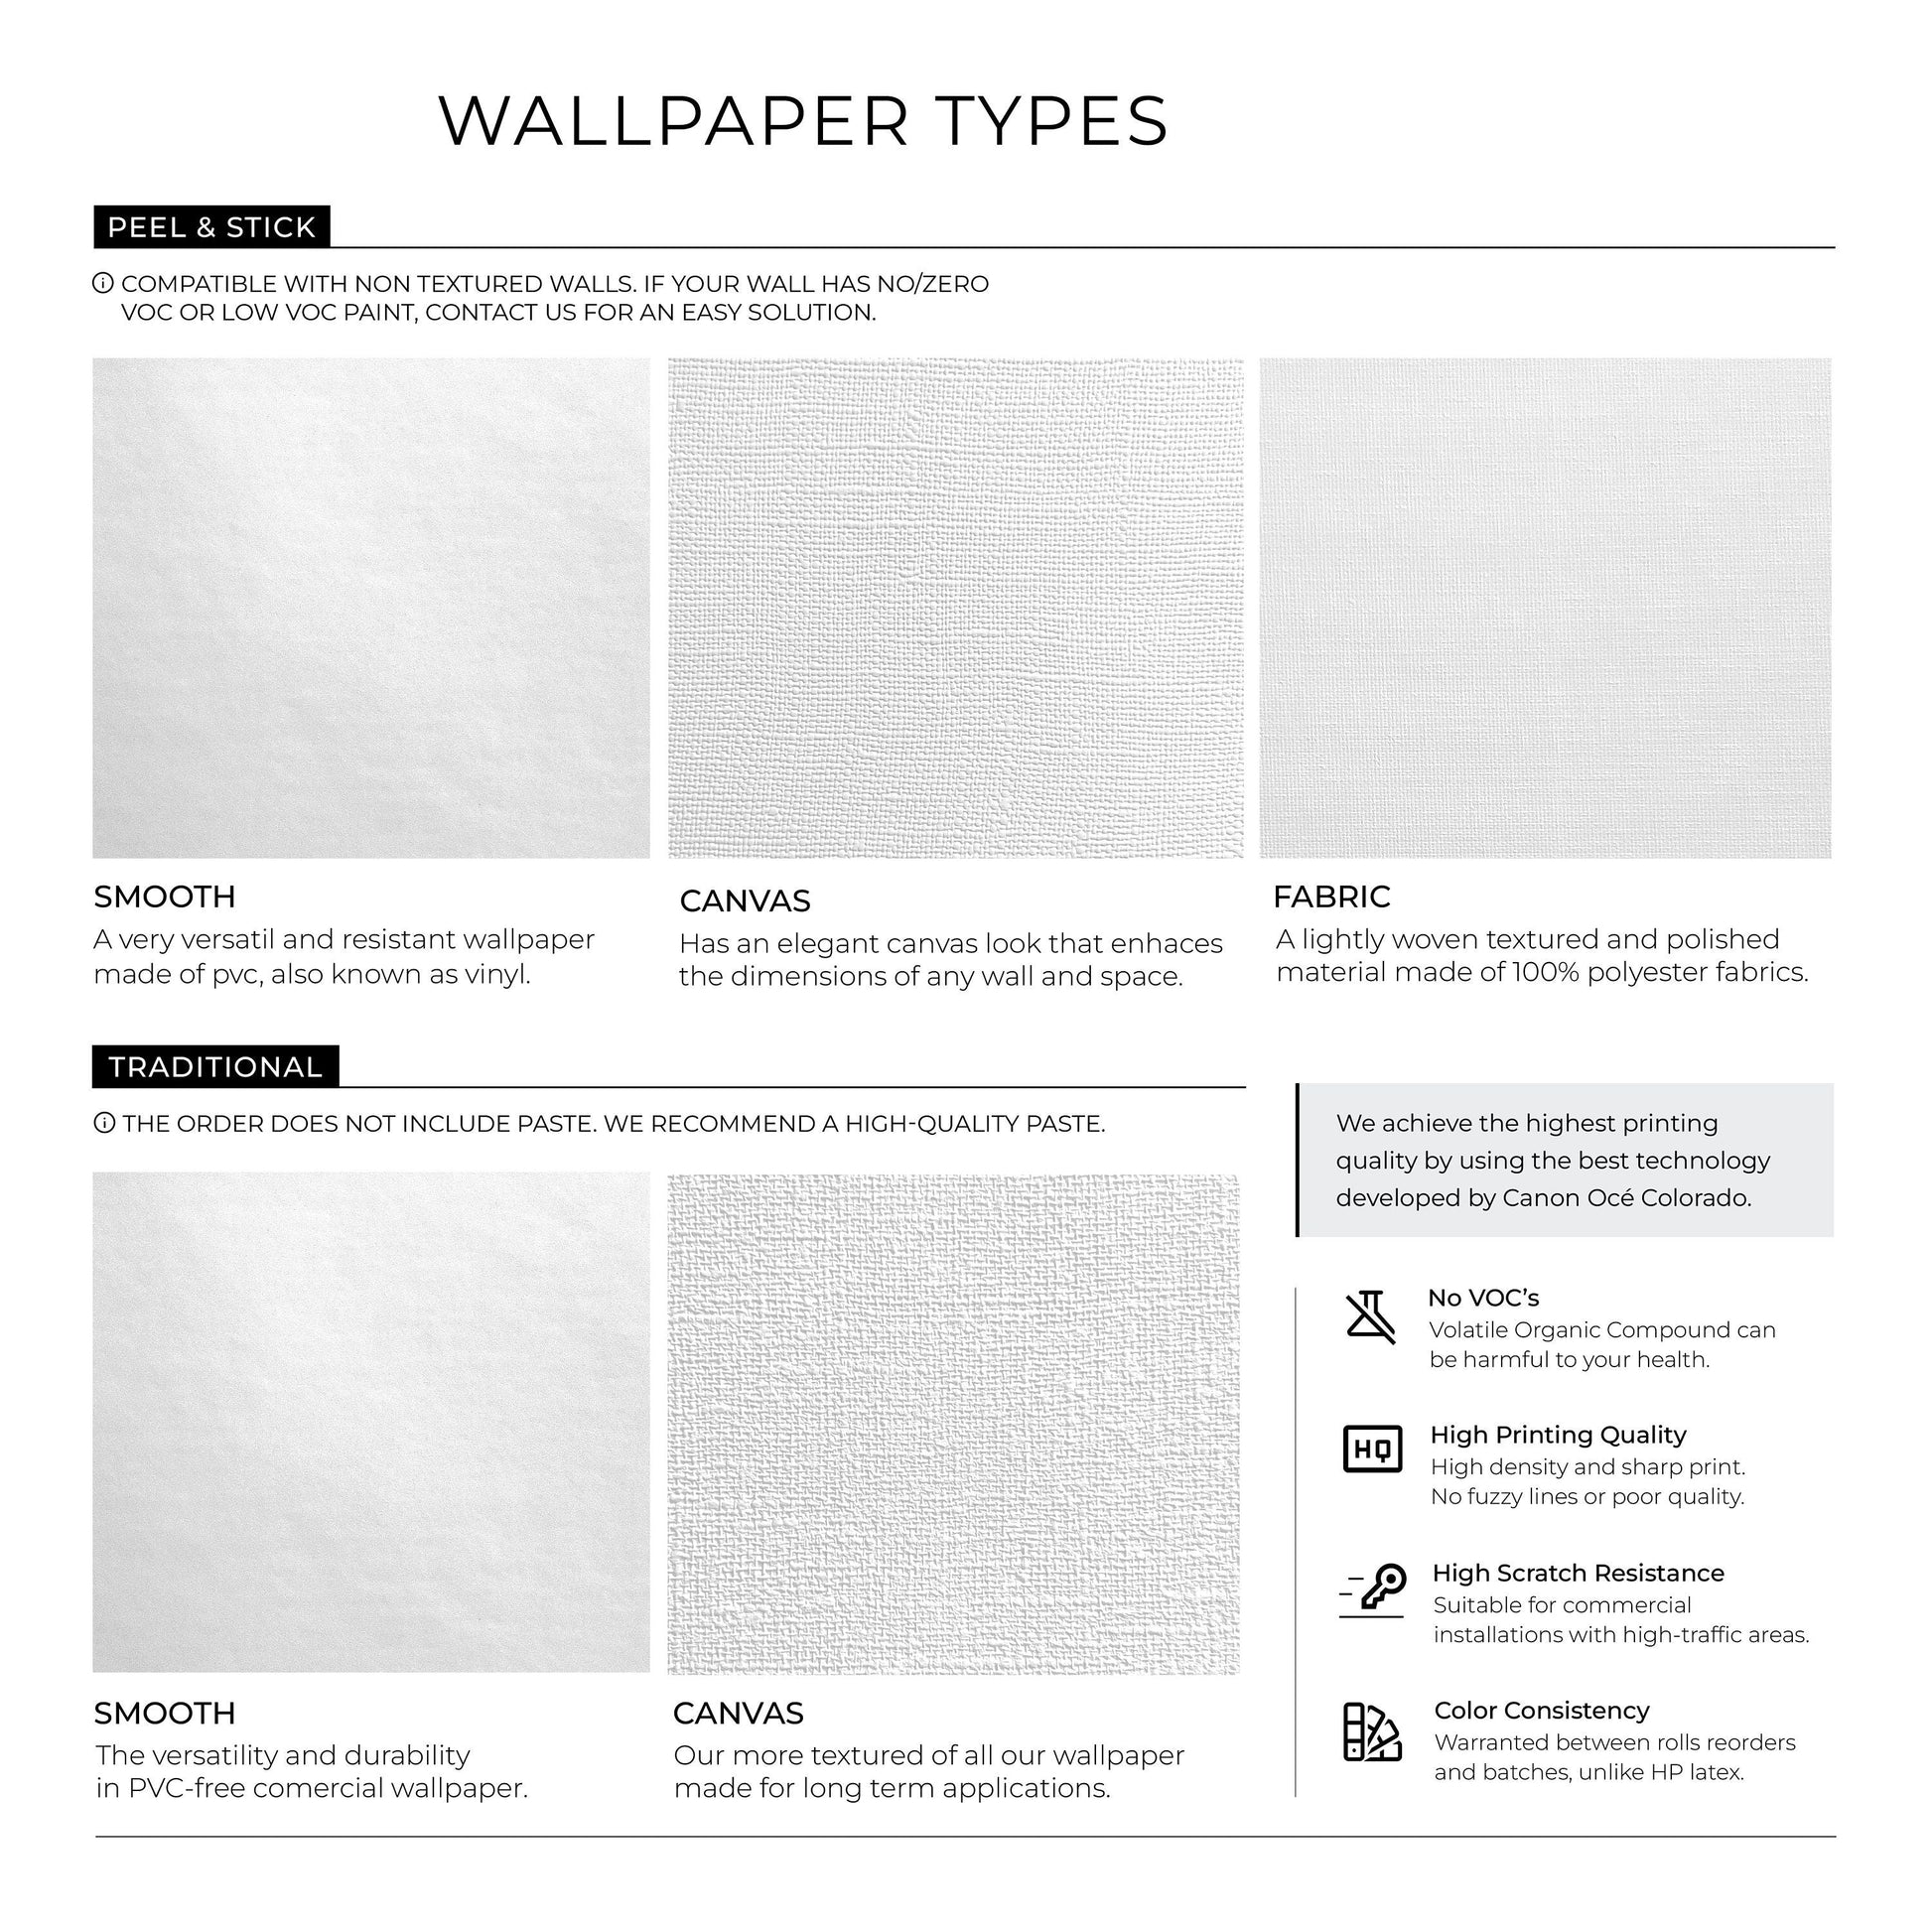 Removable Wallpaper, Temporary Wallpaper, Minimalistic Wallpaper, Peel and Stick Wallpaper, Wall Paper- A376